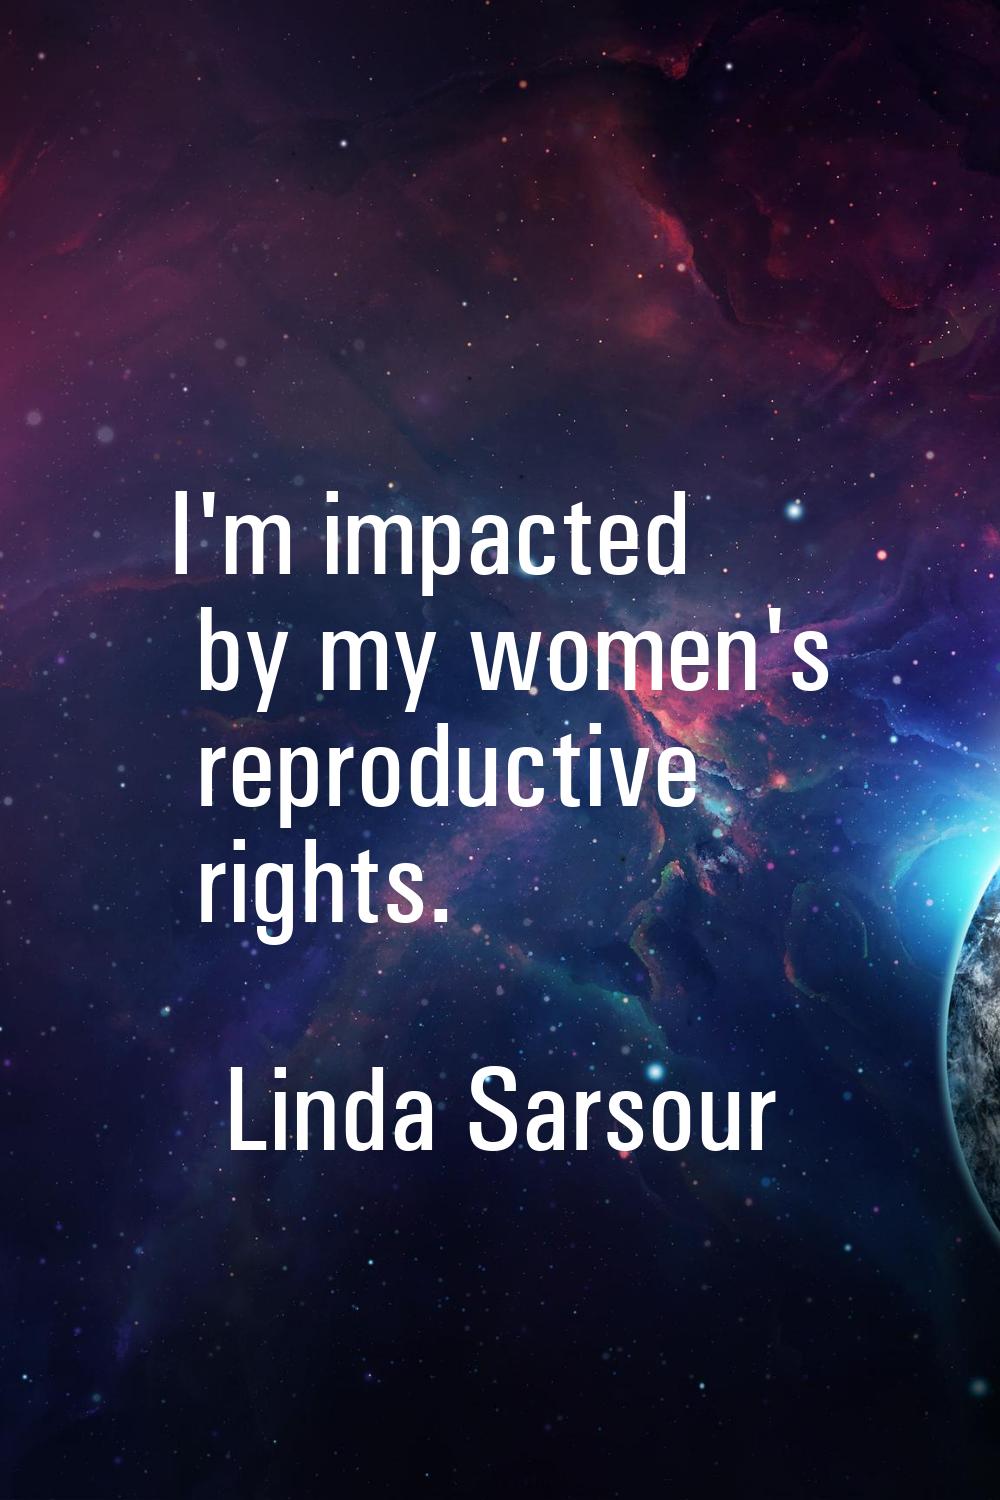 I'm impacted by my women's reproductive rights.